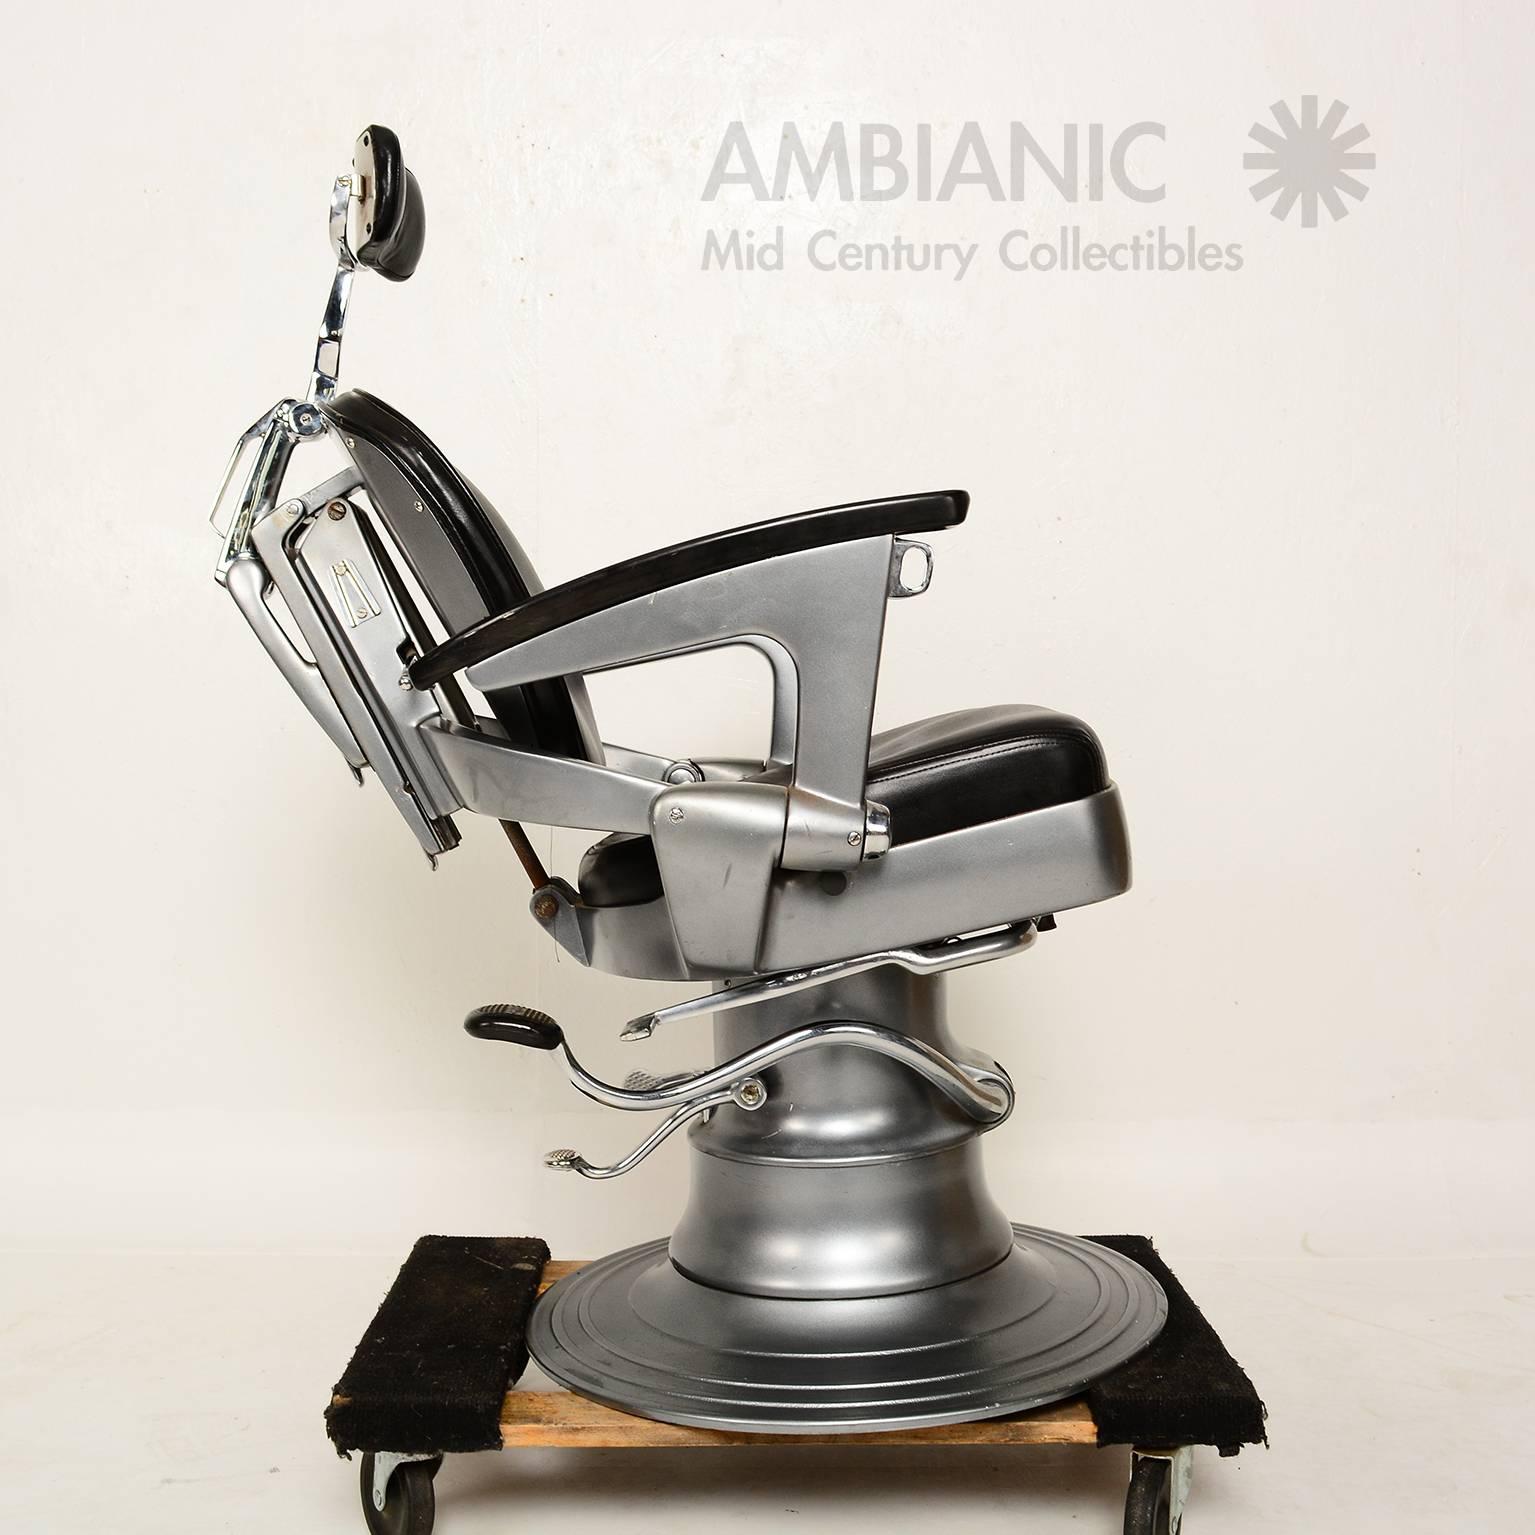 For your consideration a vintage barber chair manufactured in the USA by Ritter.
The precision and quality used to built this chair is just amazing. 
The hydraulic system works in perfect order. The cushions are upholstered in black leather with